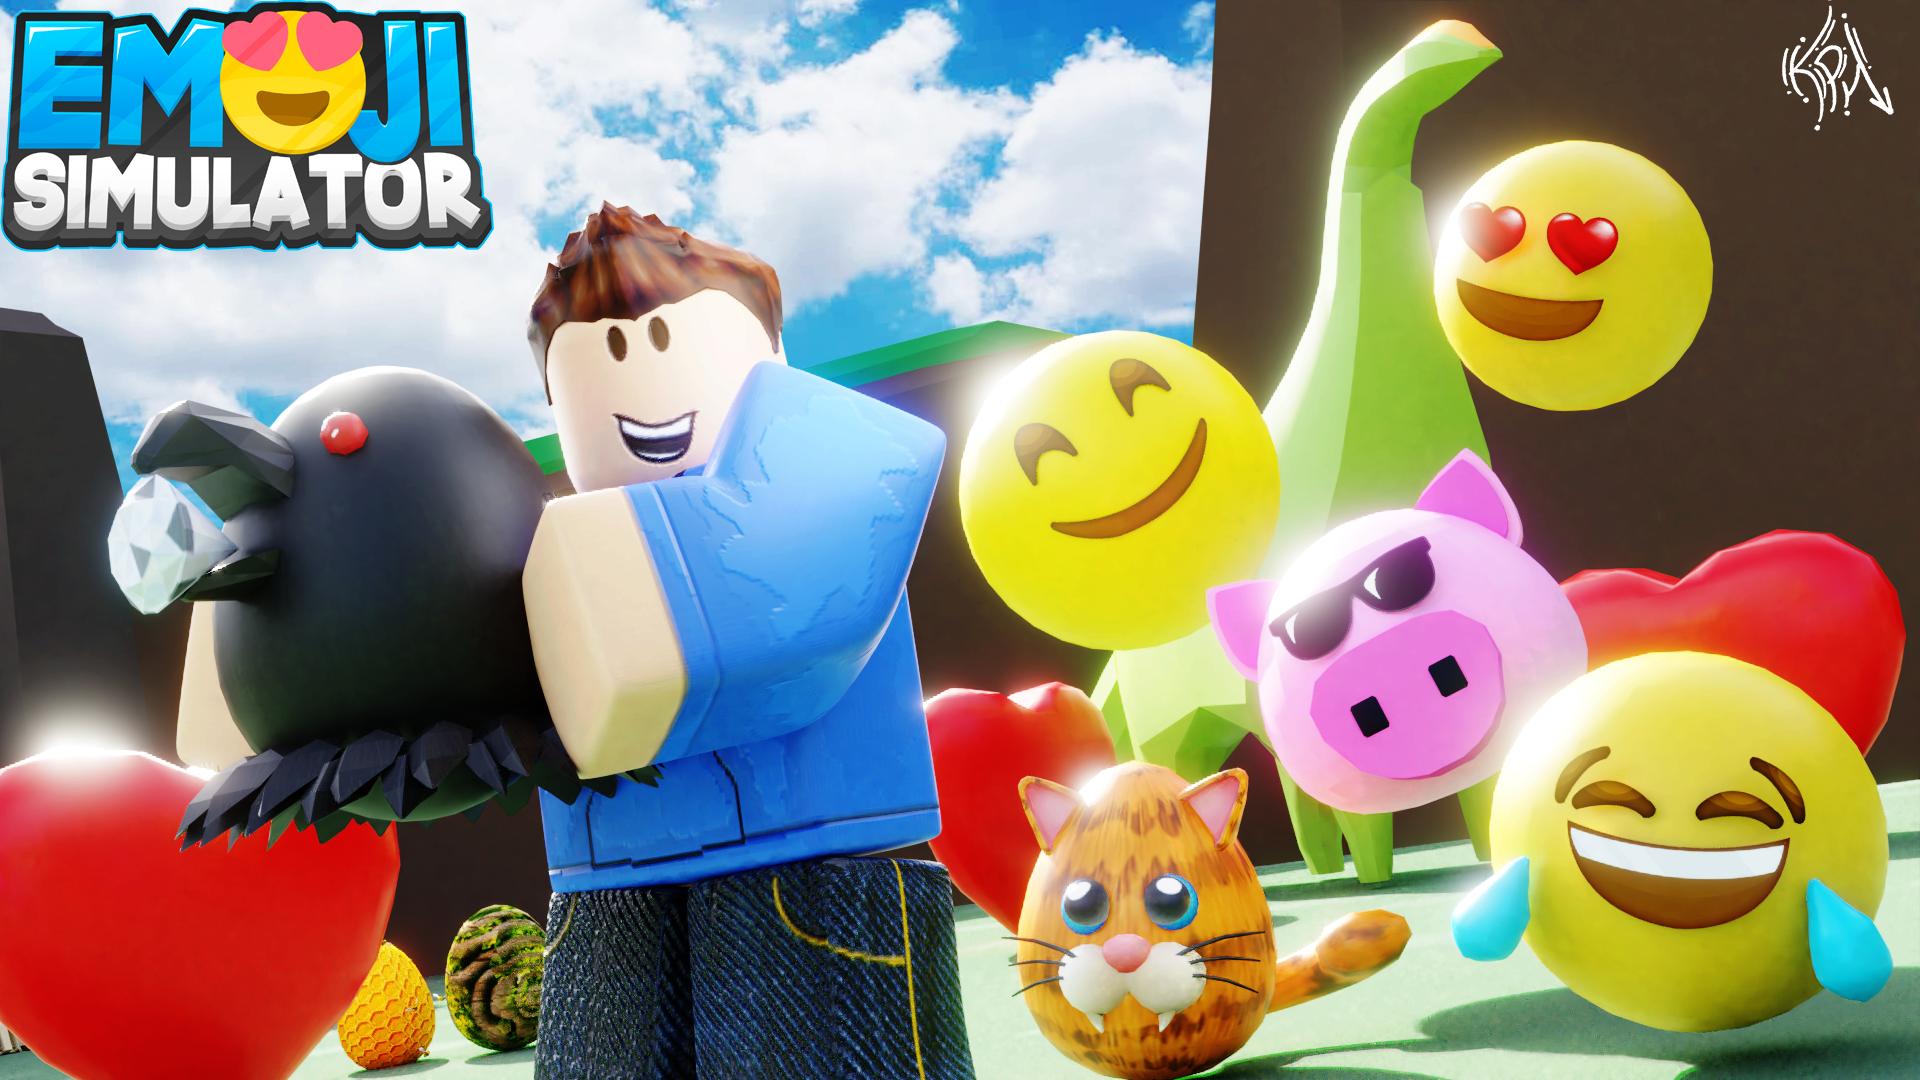 Kph529 Pa Twitter Wow Ow Wow 300 Followers Yay Also 3 Thumbnails For Itsnoahwho S Emoji Sim Wowowo Robloxdev Robloxgfx Robloxart Roblox Likes And Rts Very Much Appreciated Thank You For 300 - roblox emojis 2017